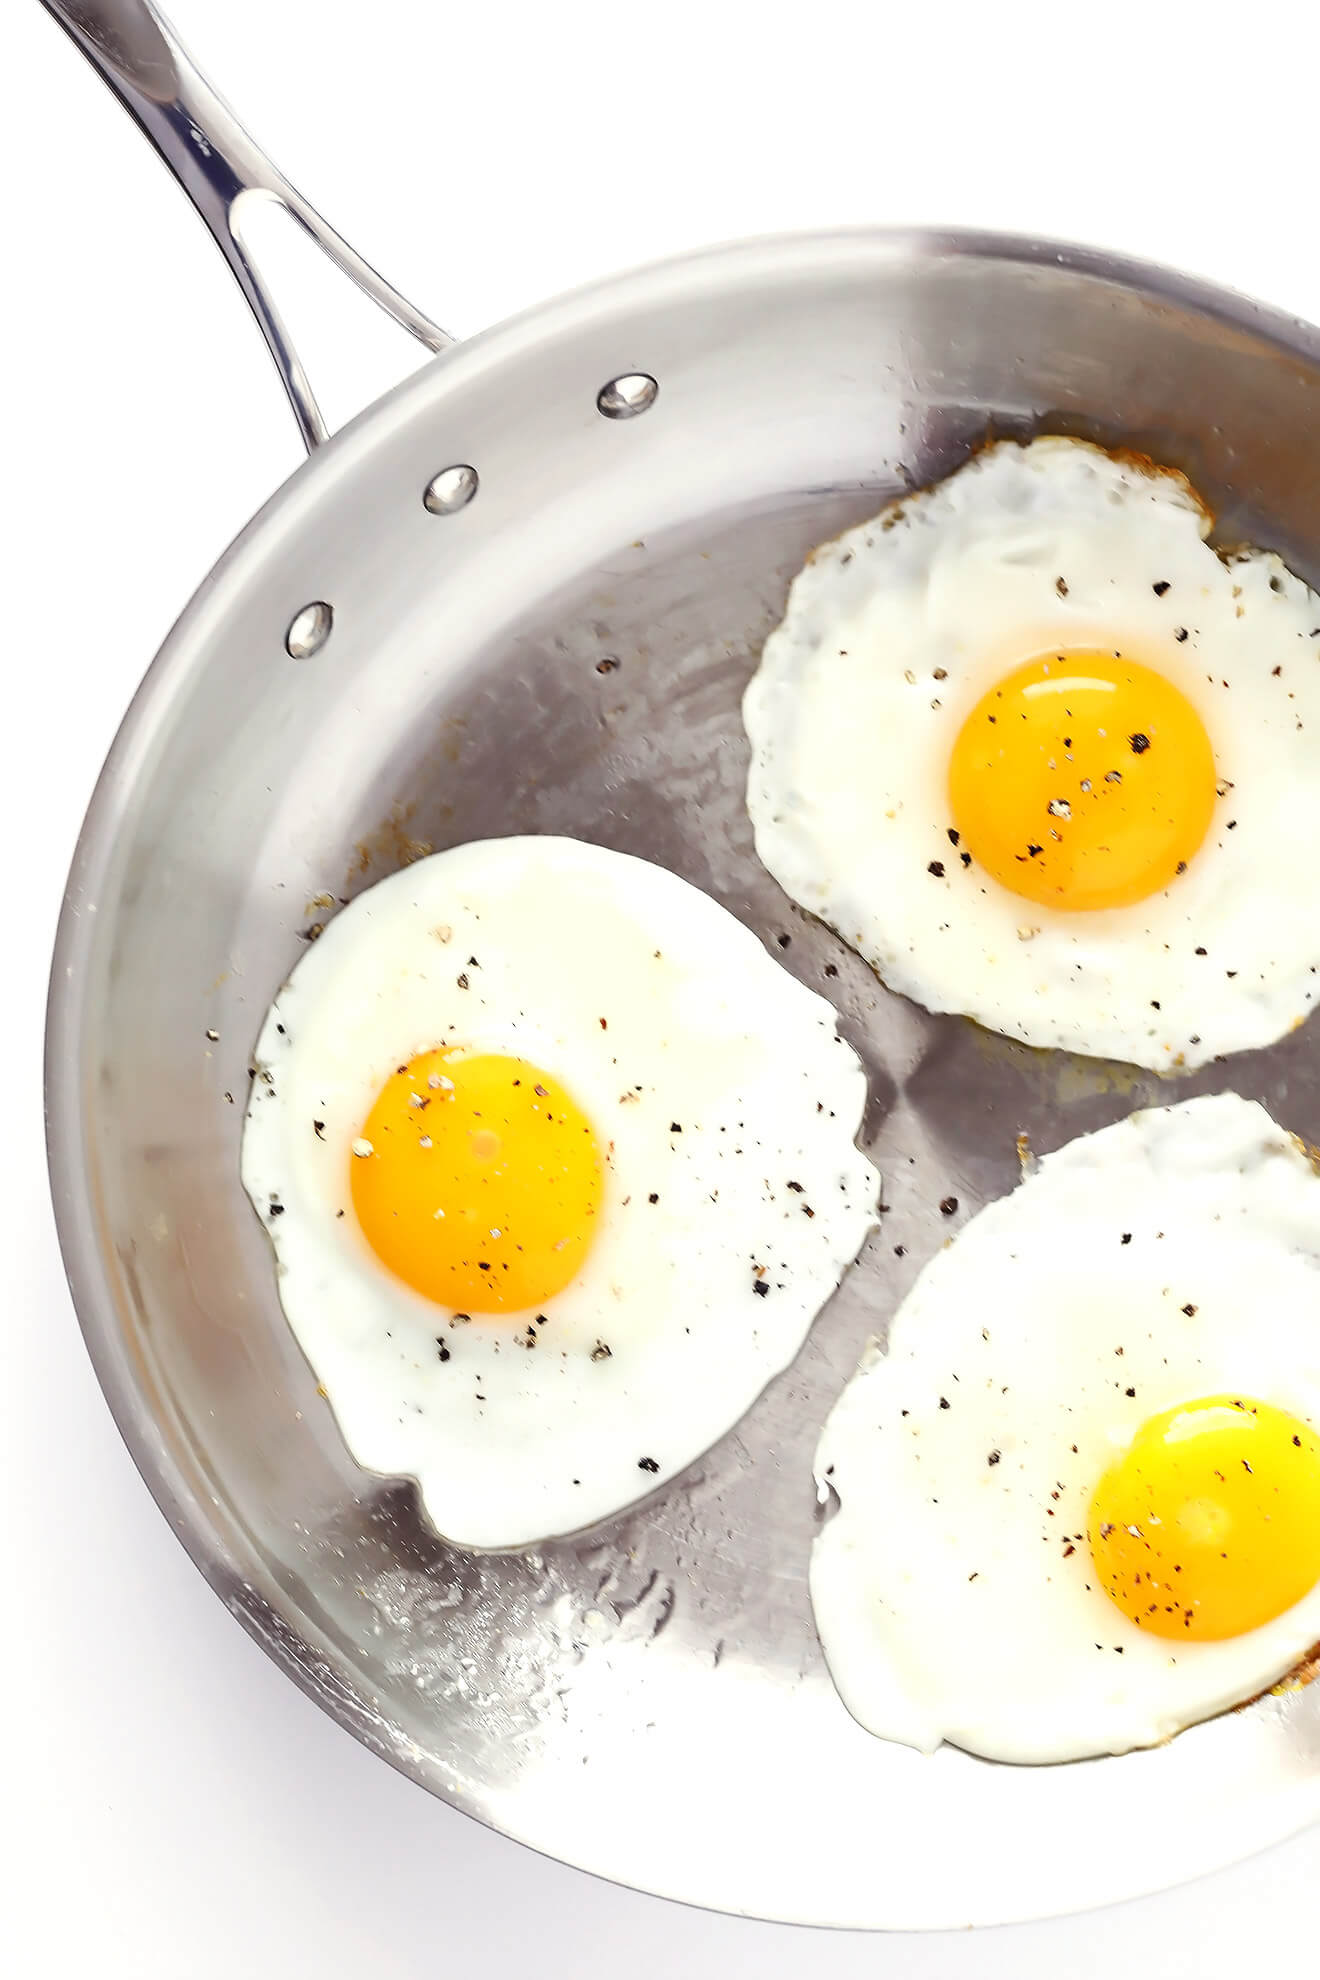 Free photo: Fried egg, Gourmet, Healthy